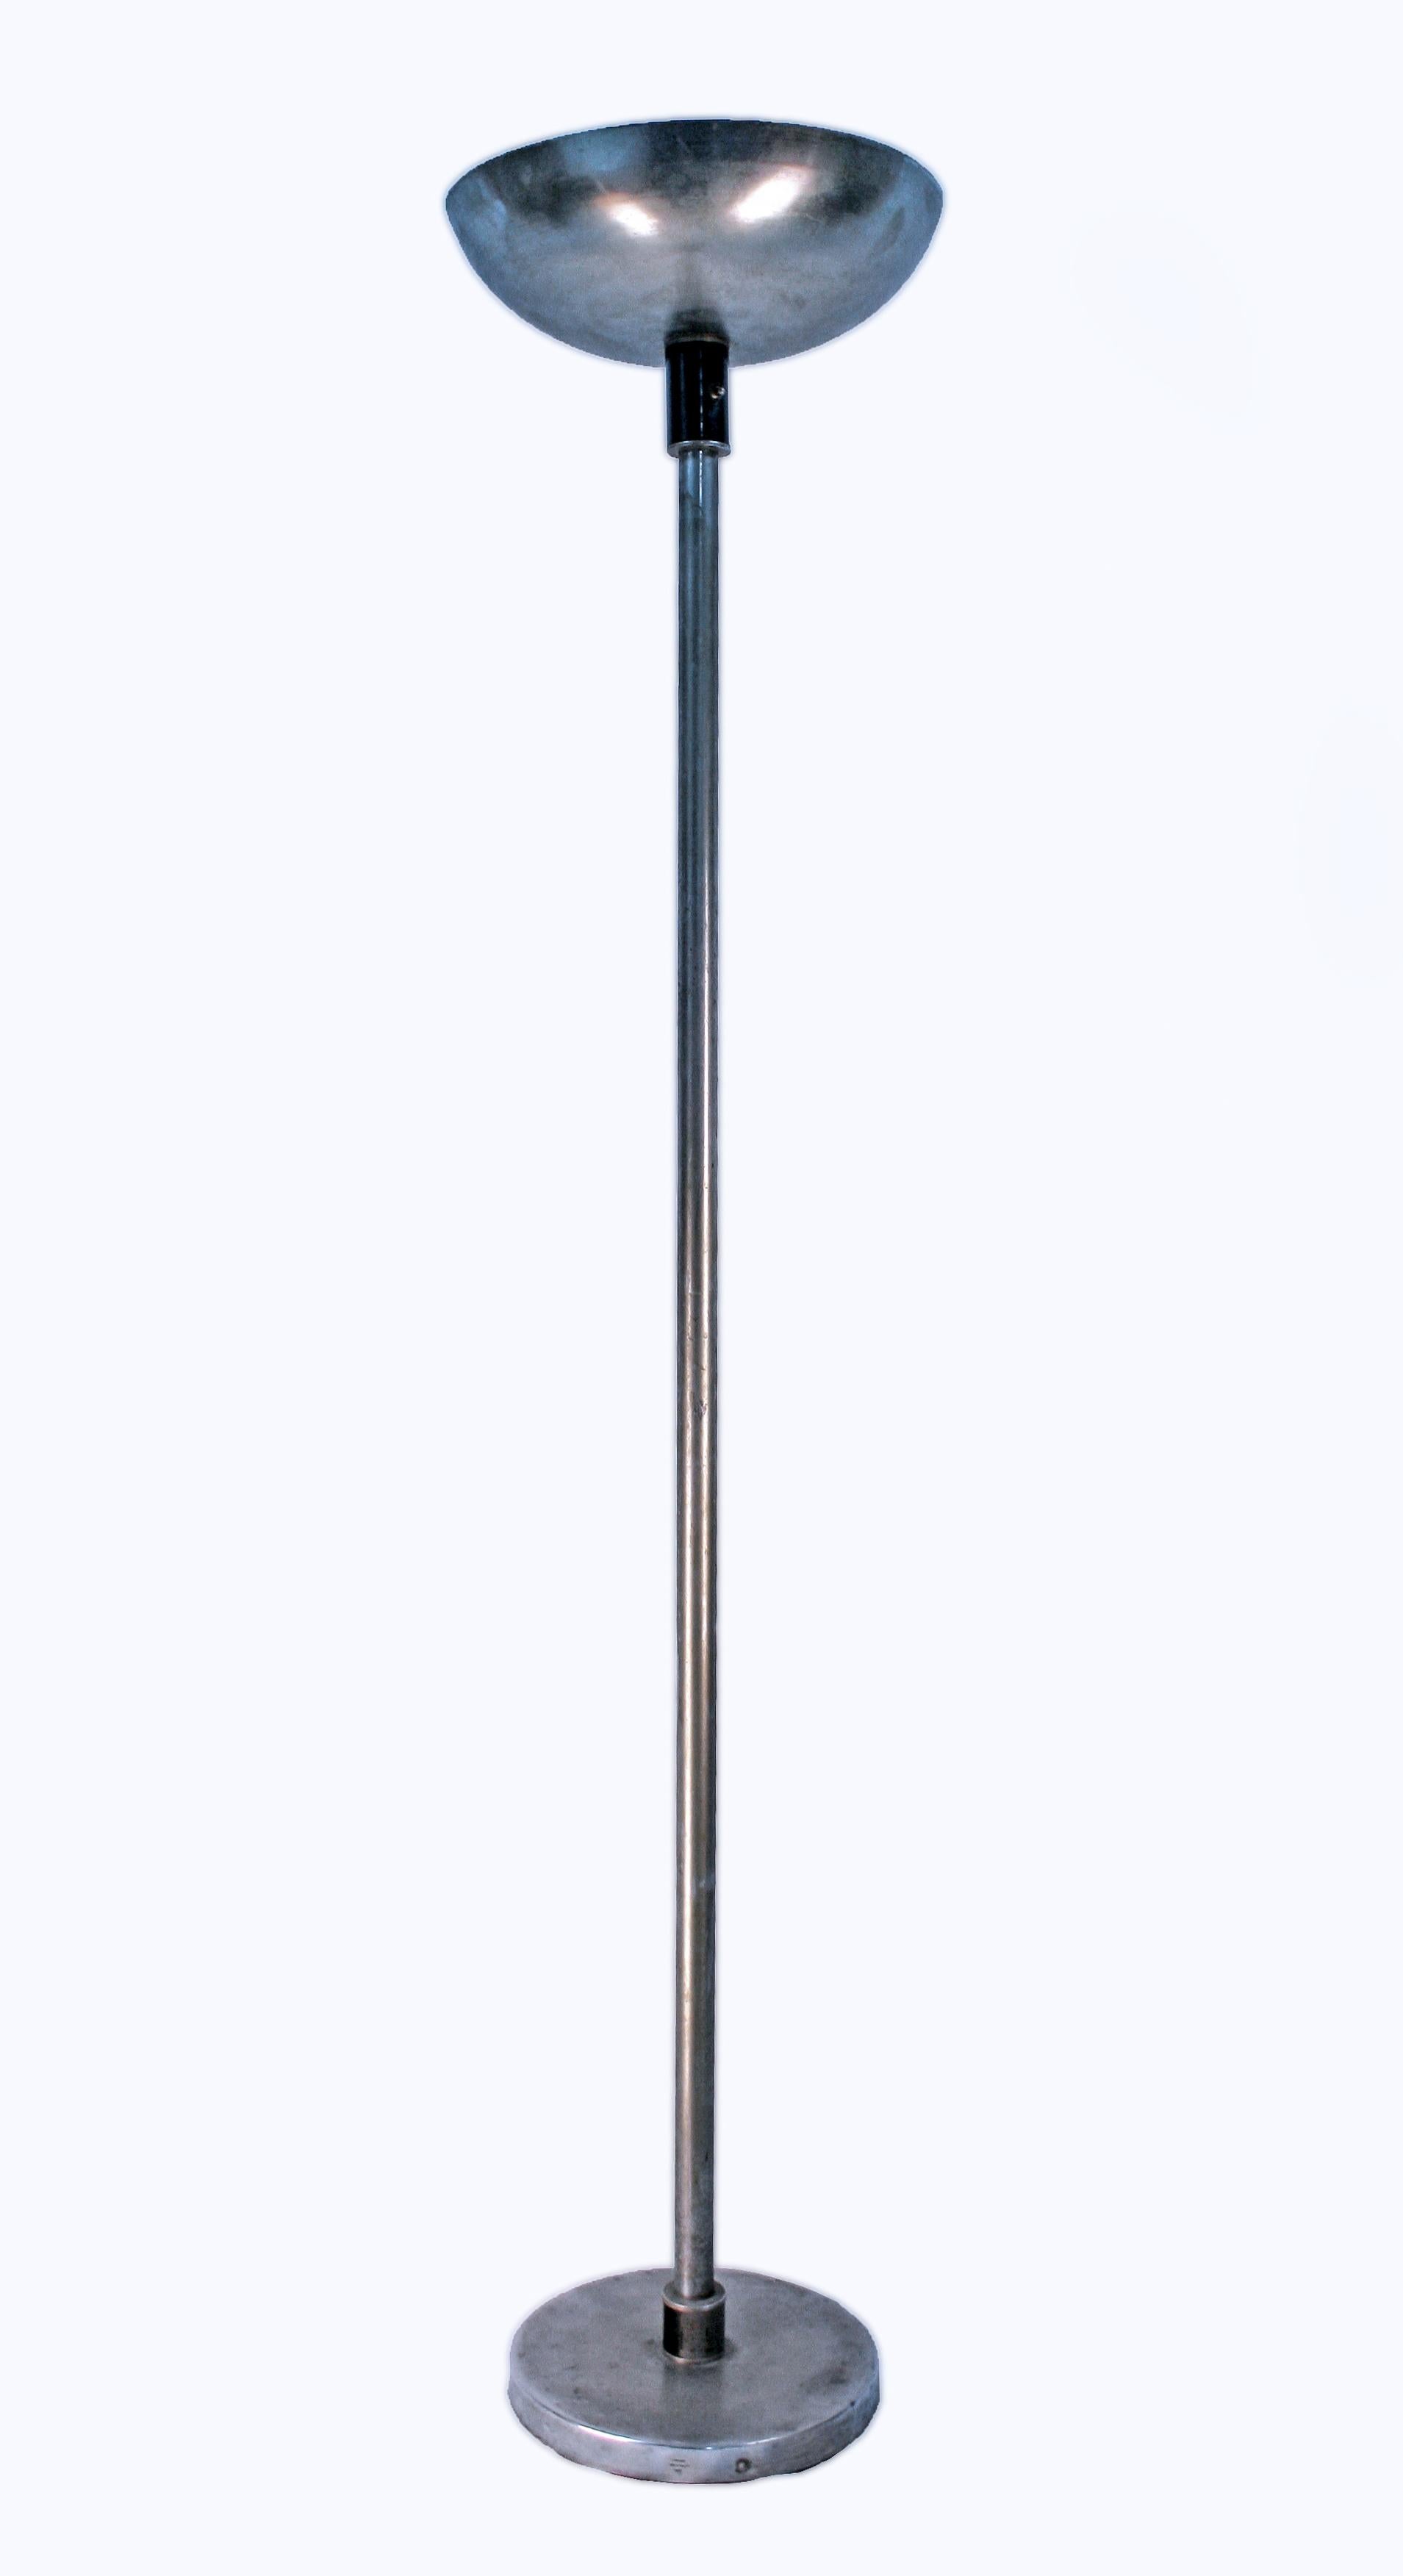 Early 20th century Art Déco french design polished nickel plated chrome floor lamp by La Maison Desny

By: La Maison Desny
Material: chrome, cord, metal, nickel
Technique: plated, metalwork, cast, polished
Dimensions: 16 in x 69 in
Date: early 20th